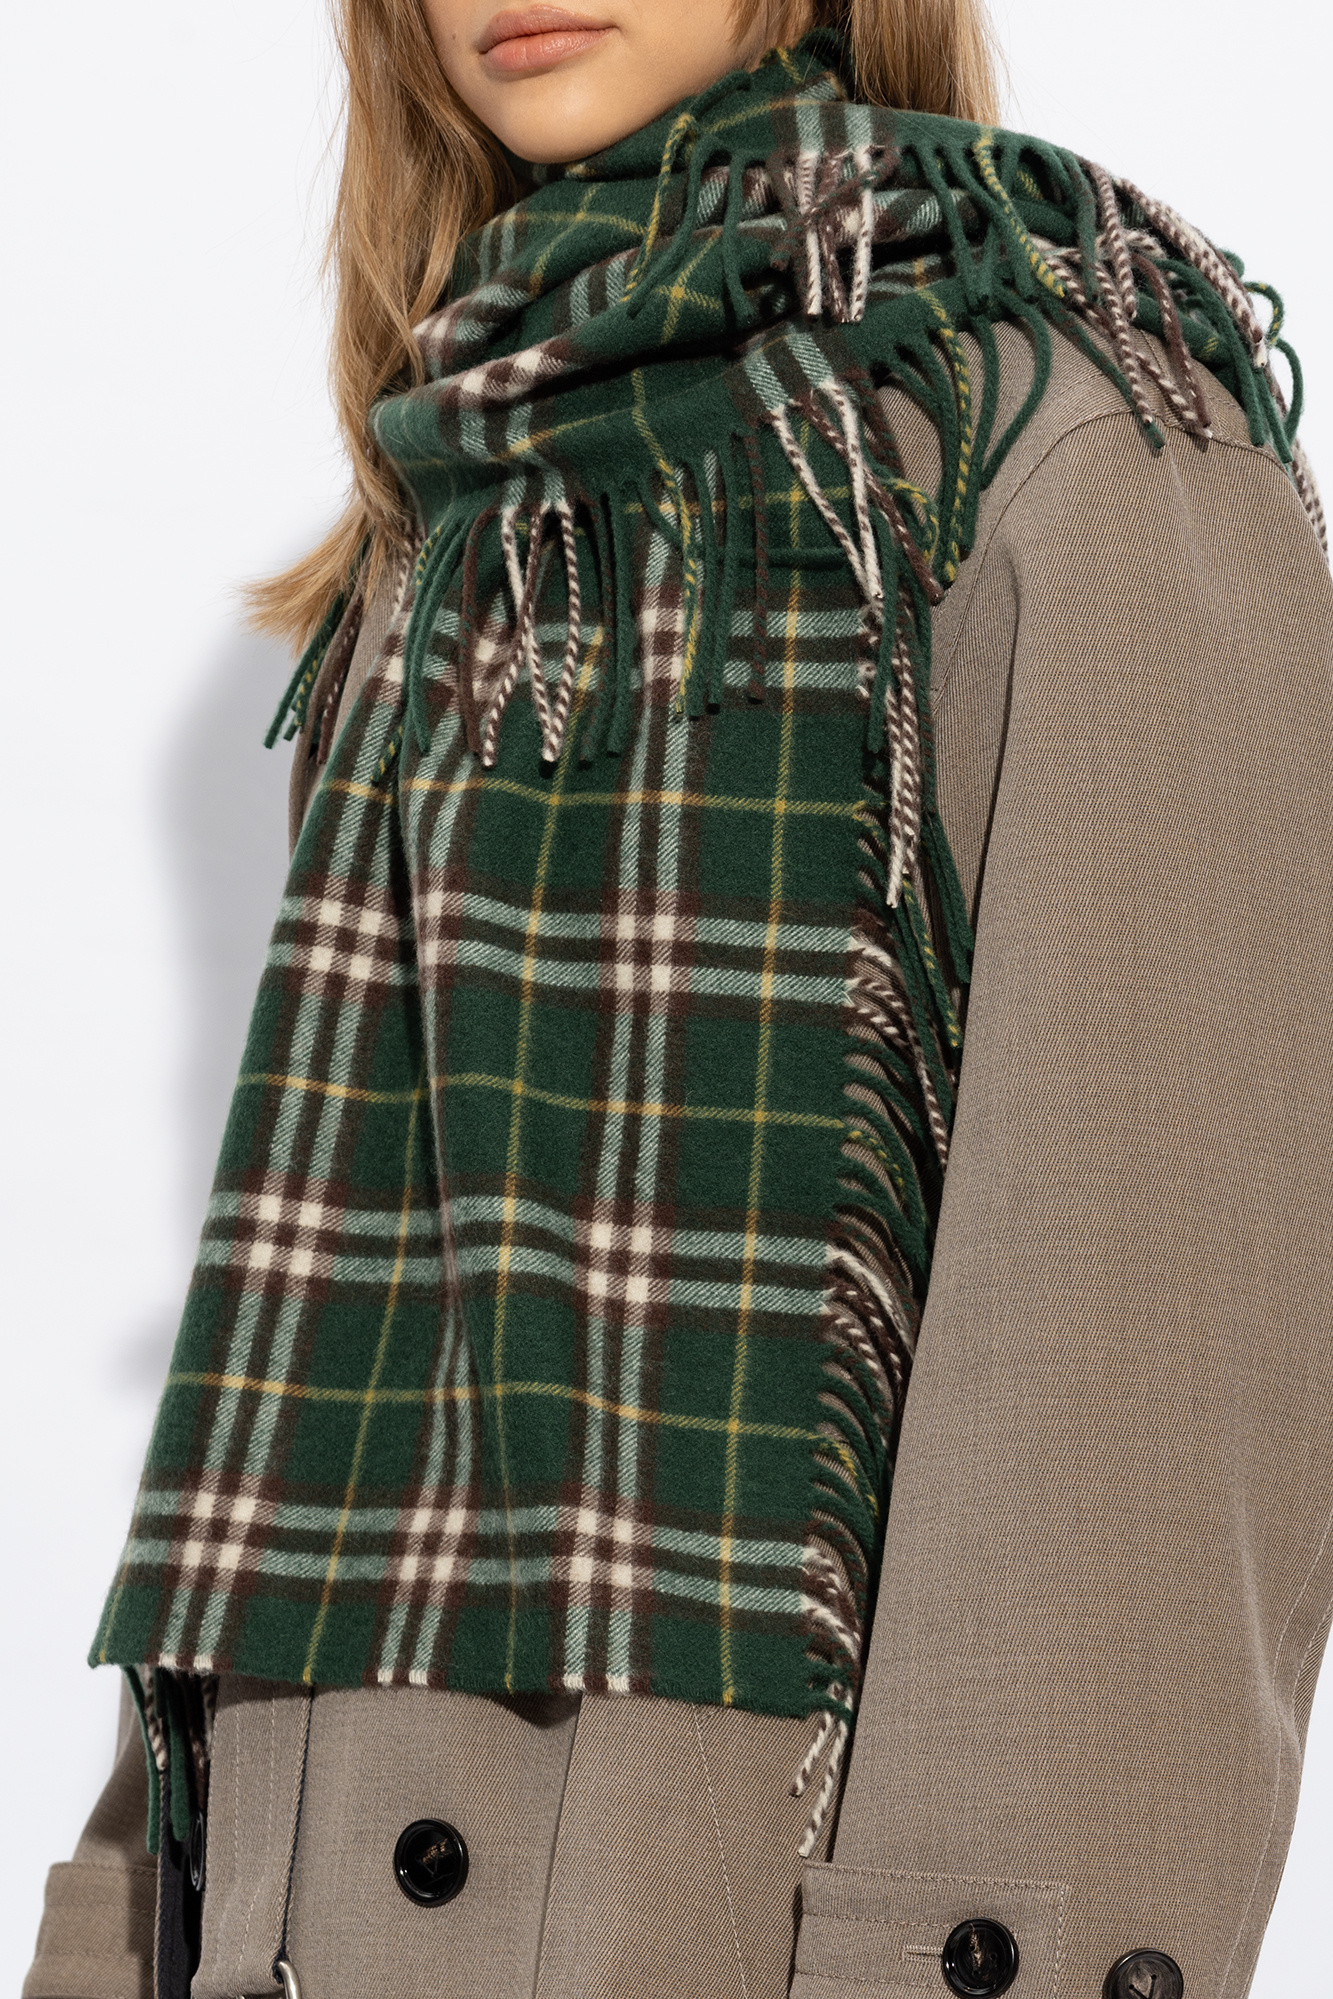 burberry and Cashmere scarf